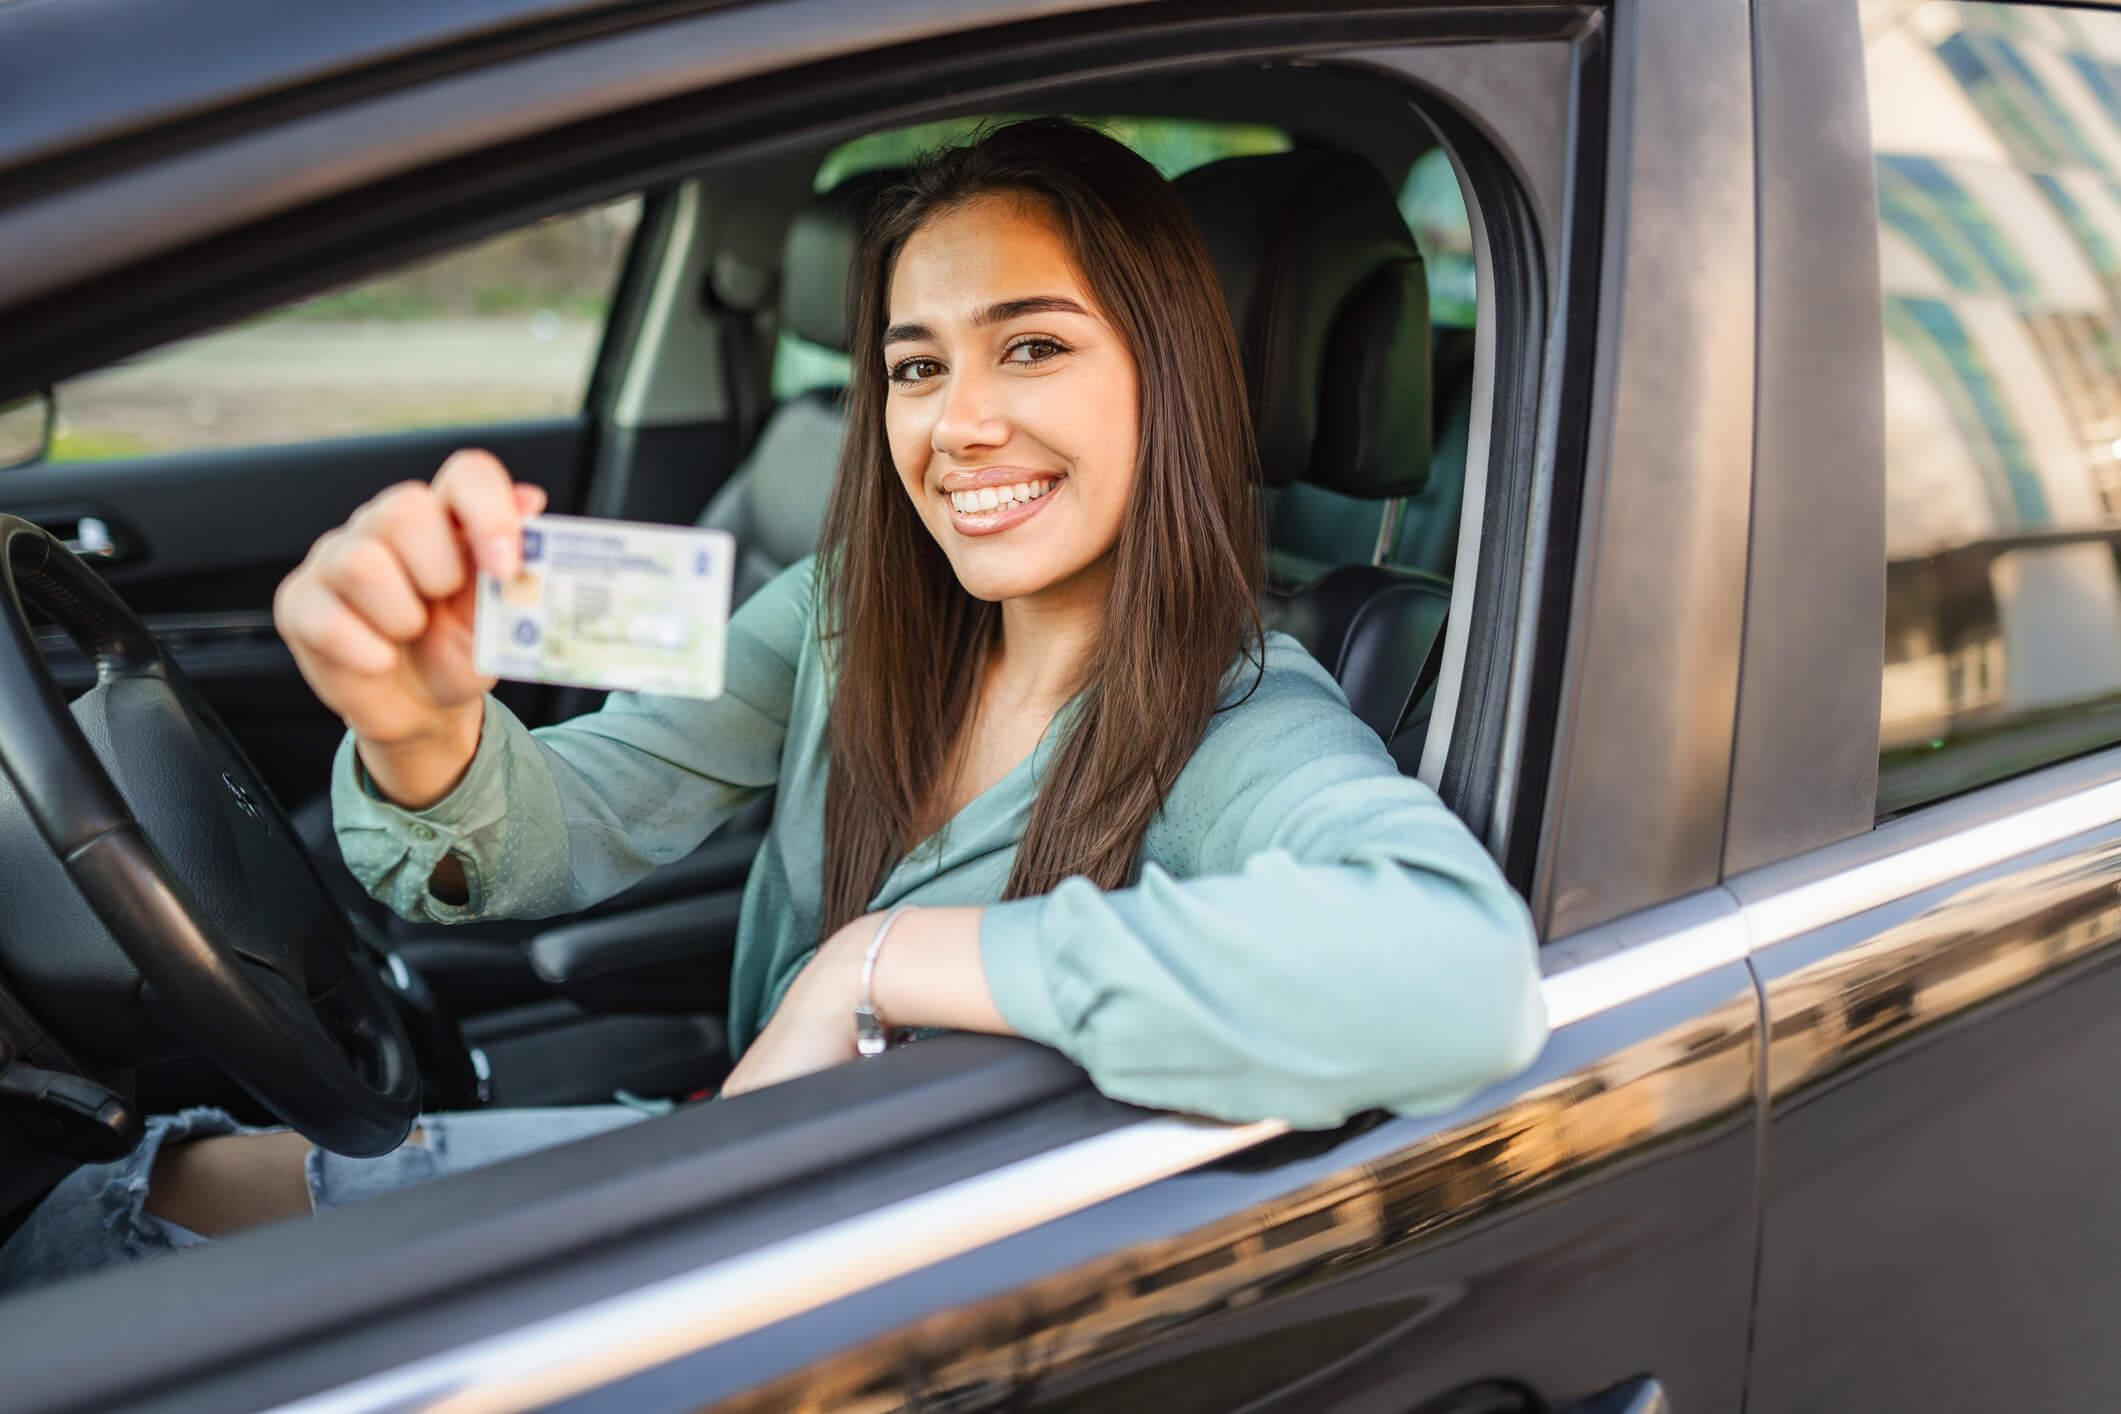 A smiling woman holding a driver's license